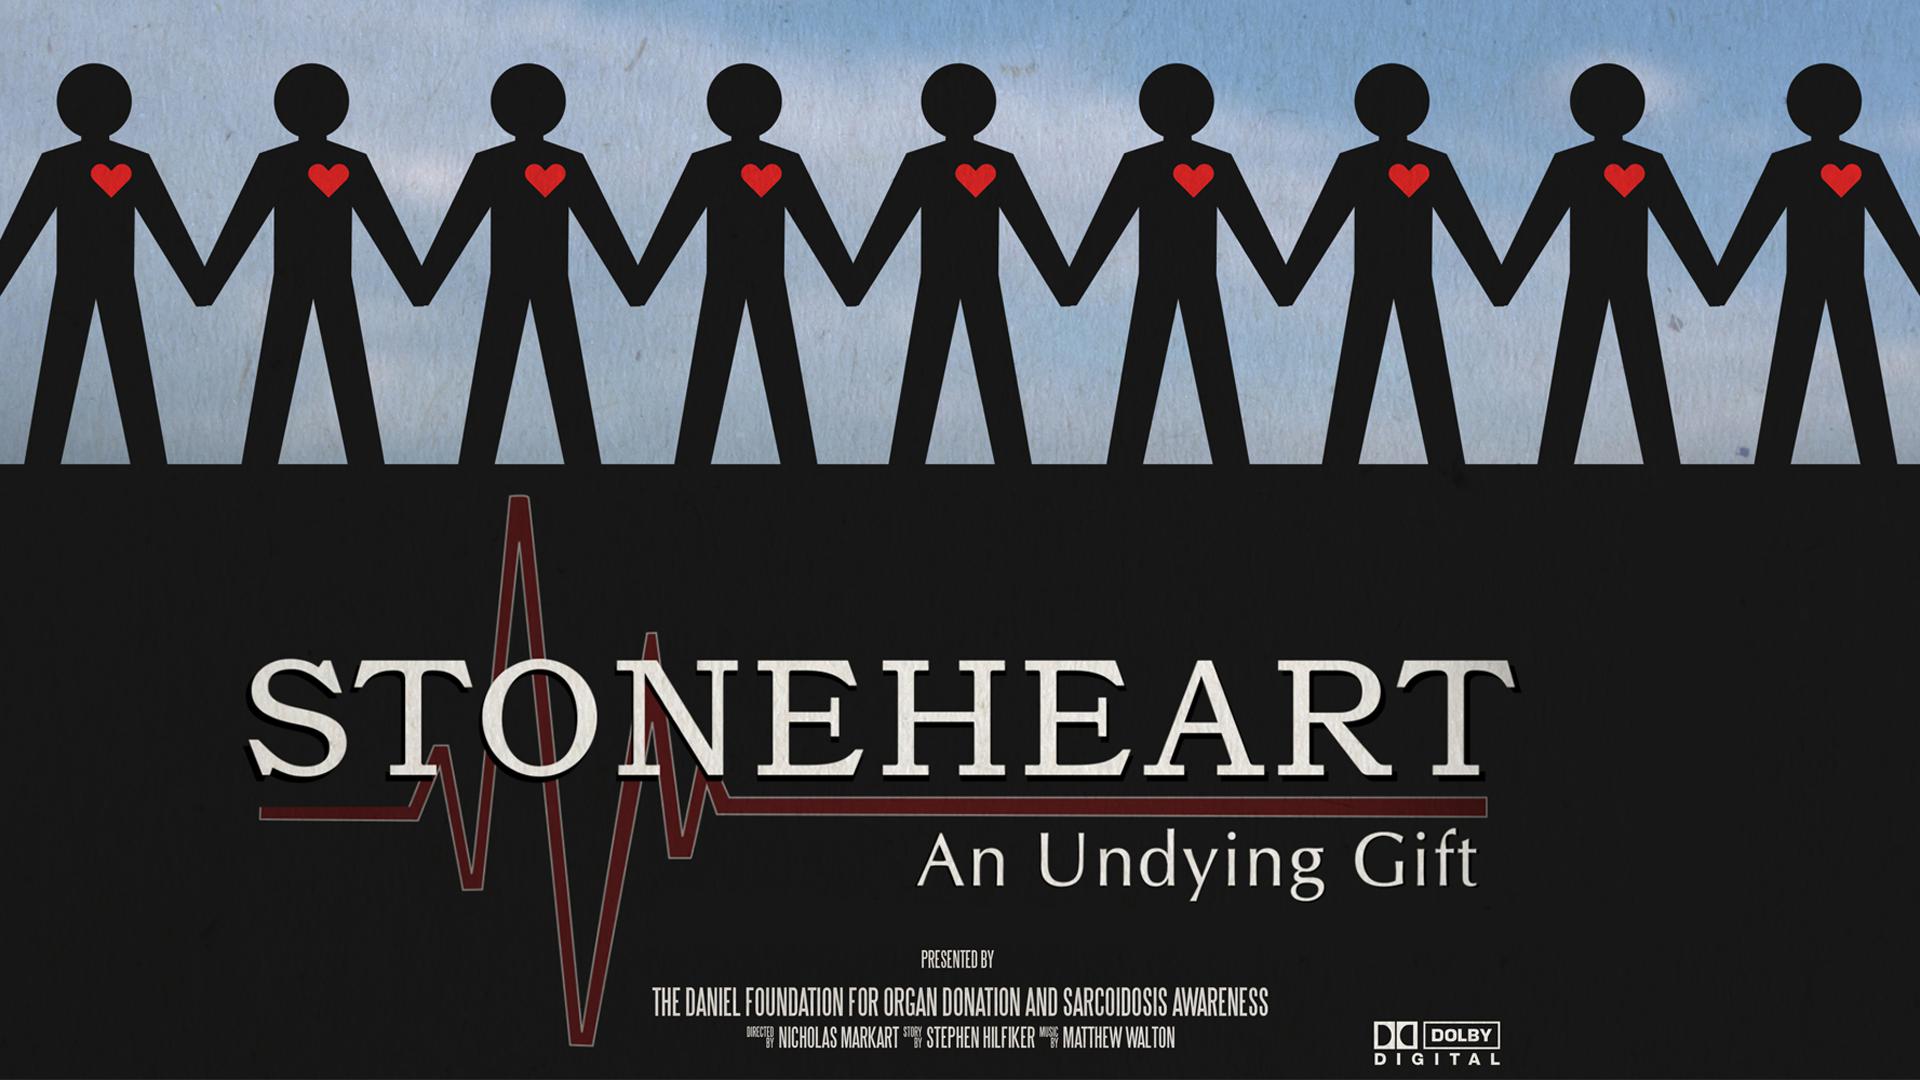 Stoneheart: An Undying Gift